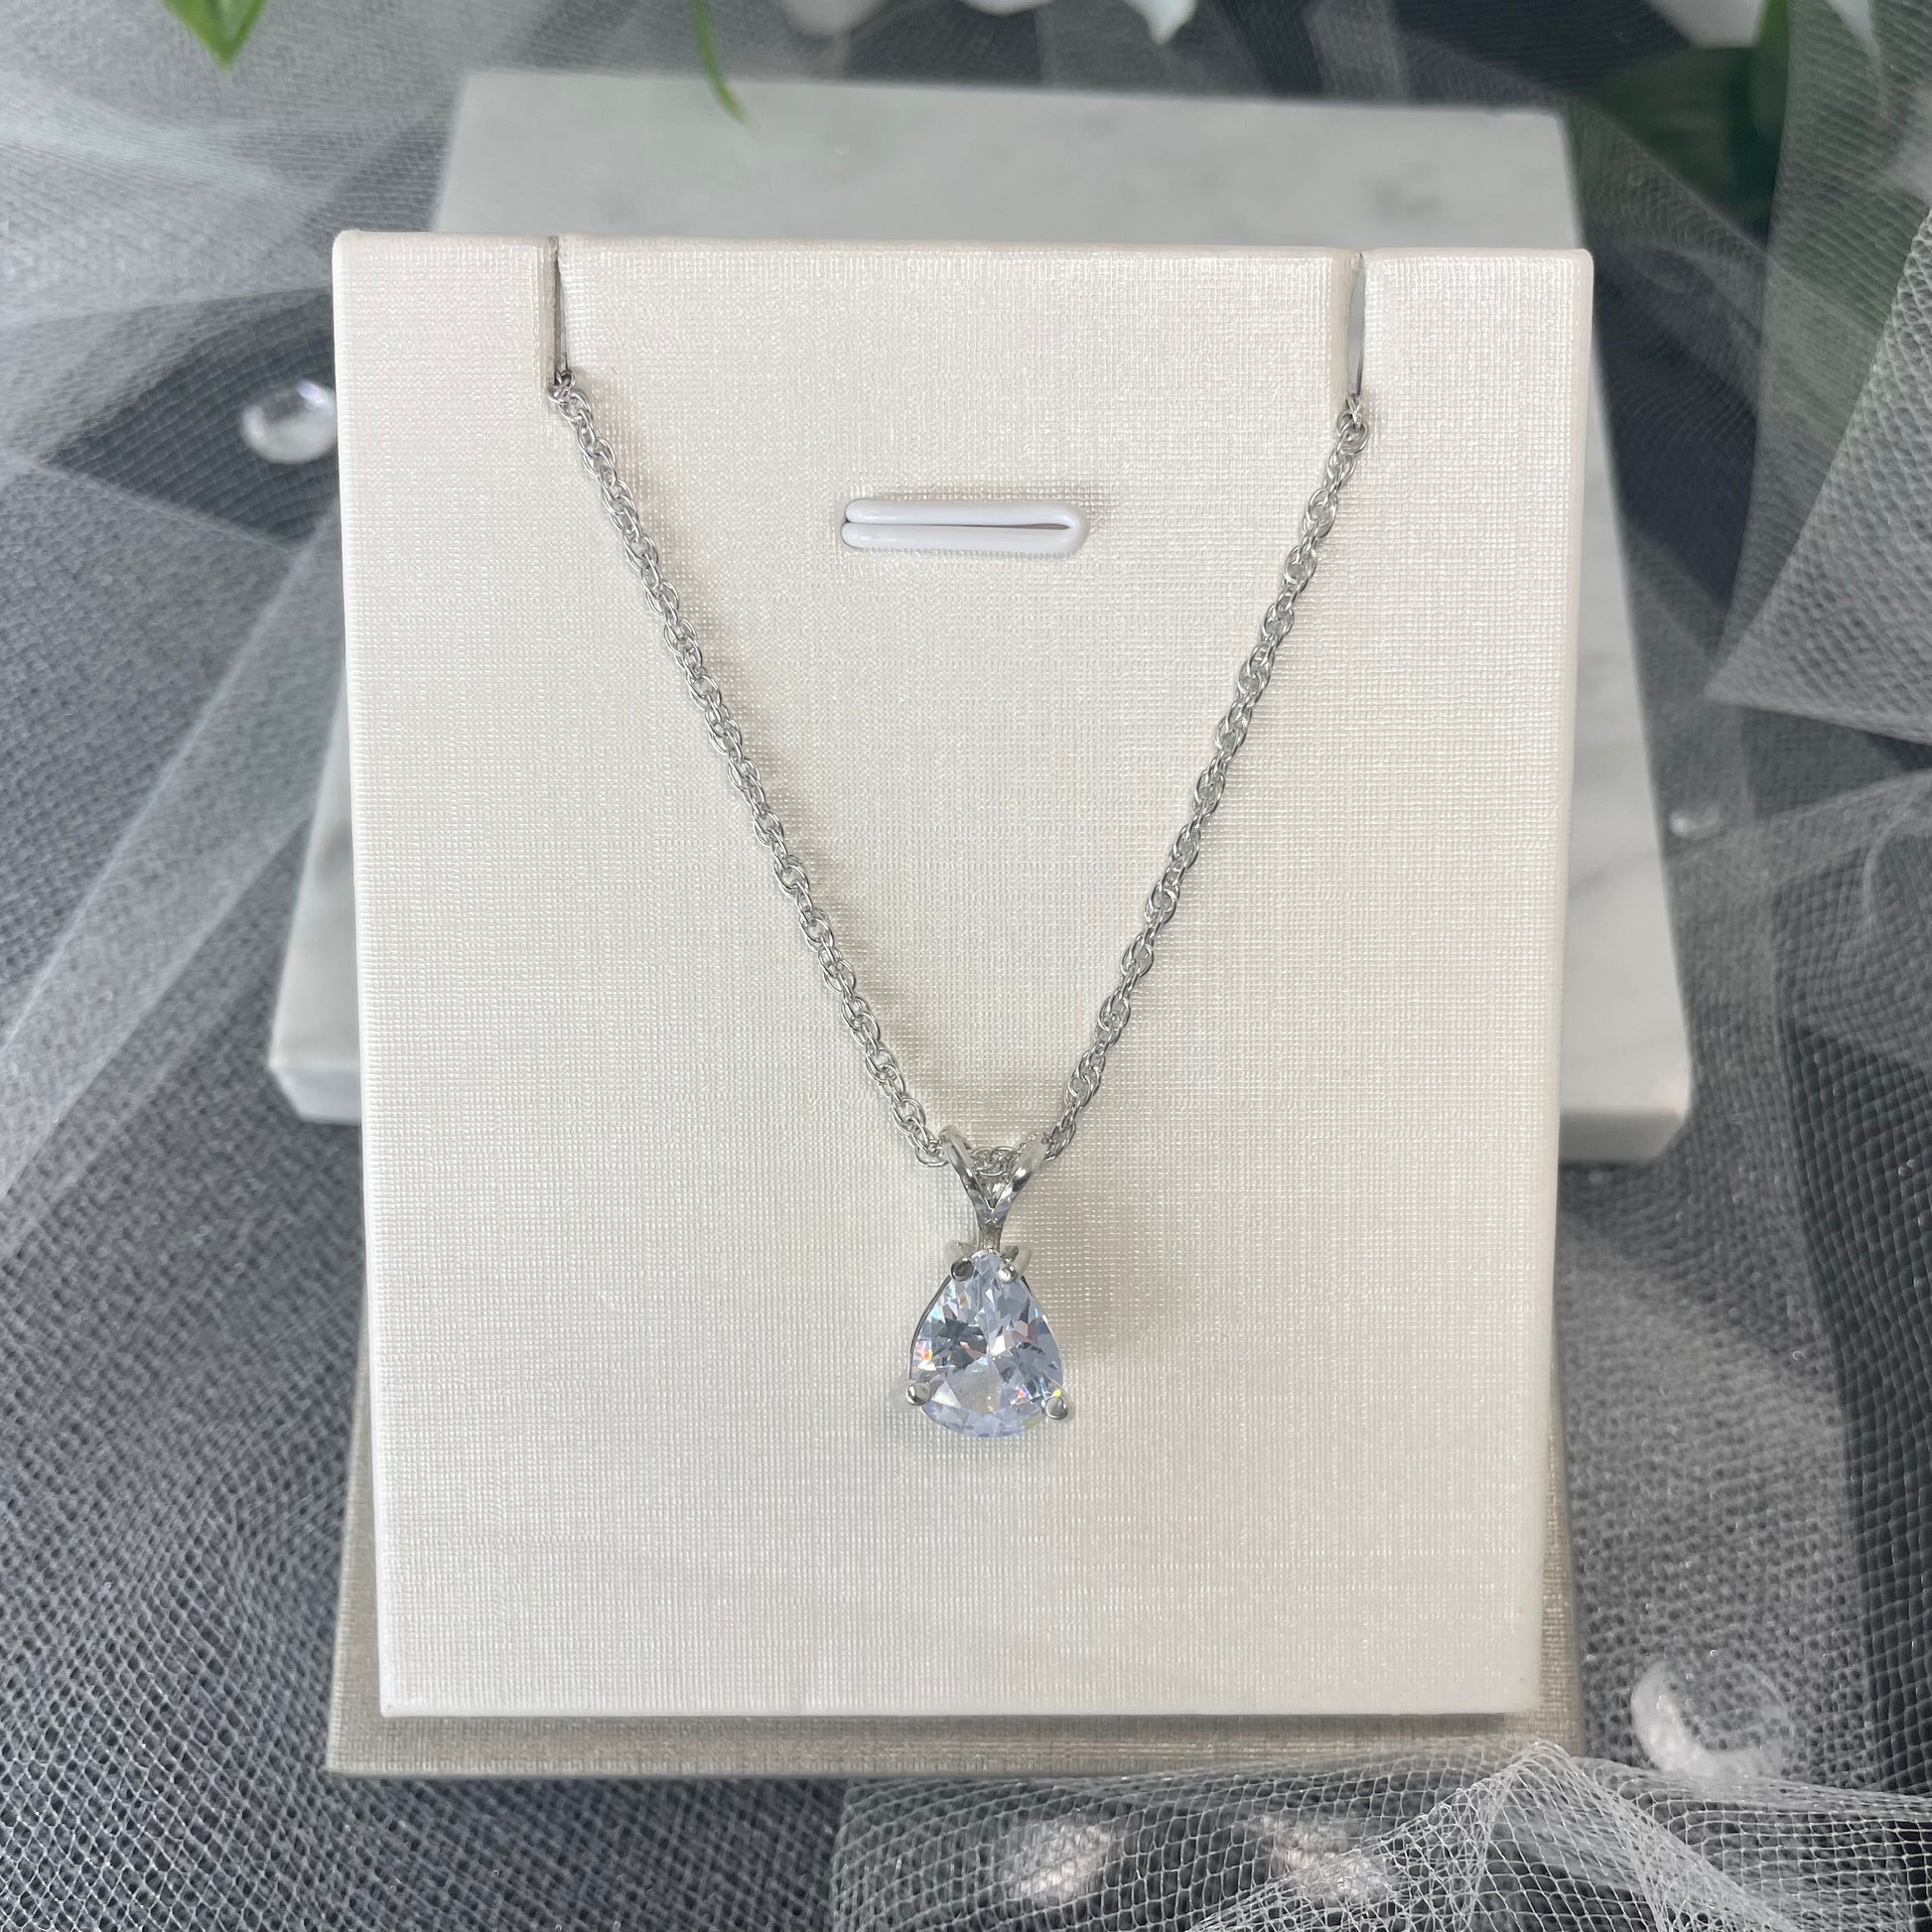 Eliana silver plated necklace with a teardrop cubic glass diamond pendant held by a 'V' silver fixture on a double cross chain.